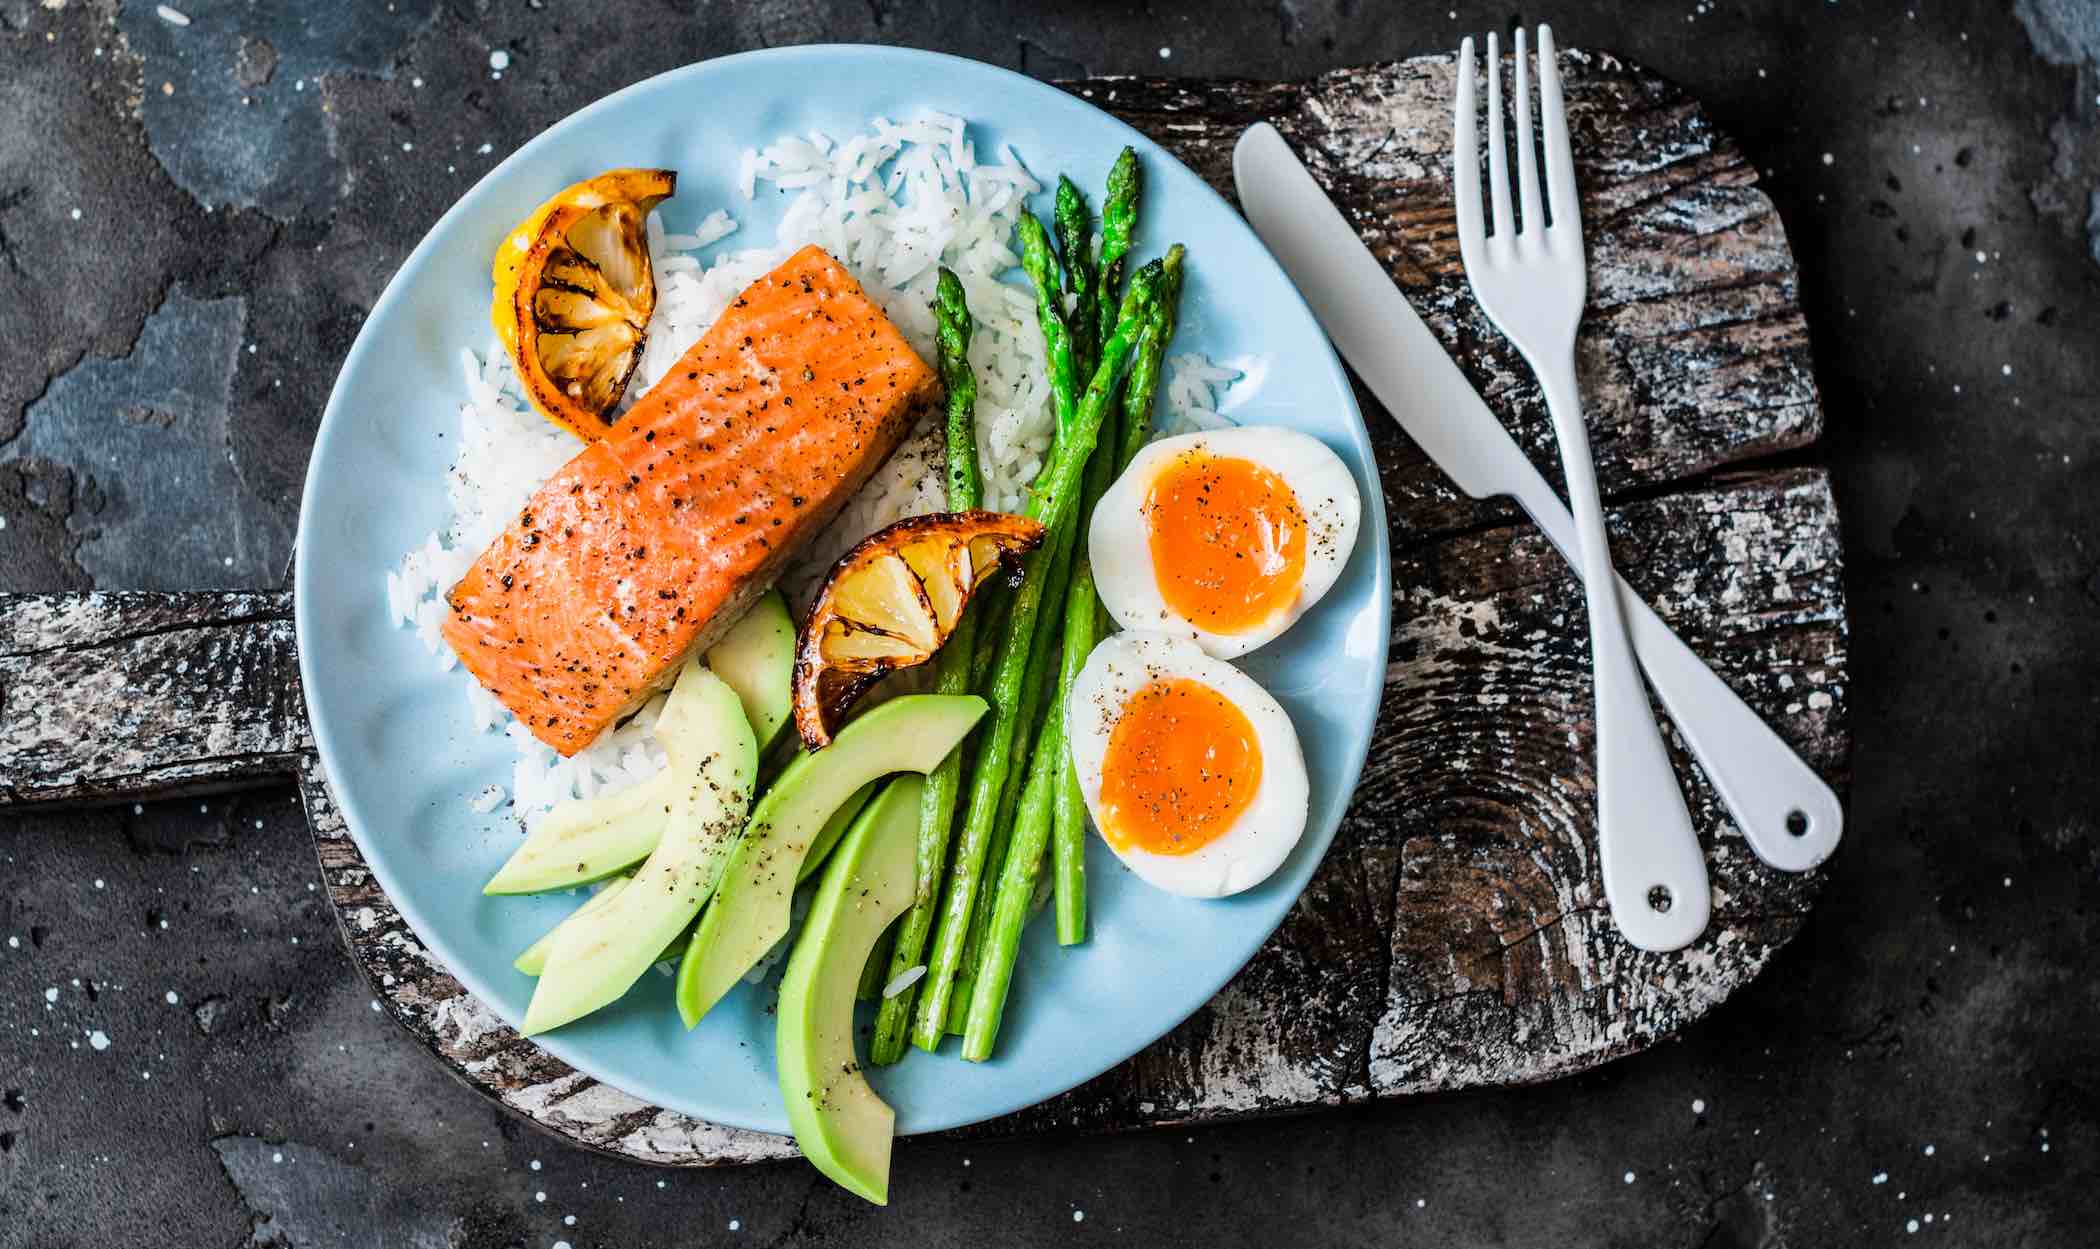 A plate of rice, salmon, avocado, asparagus, and soft-boiled egg